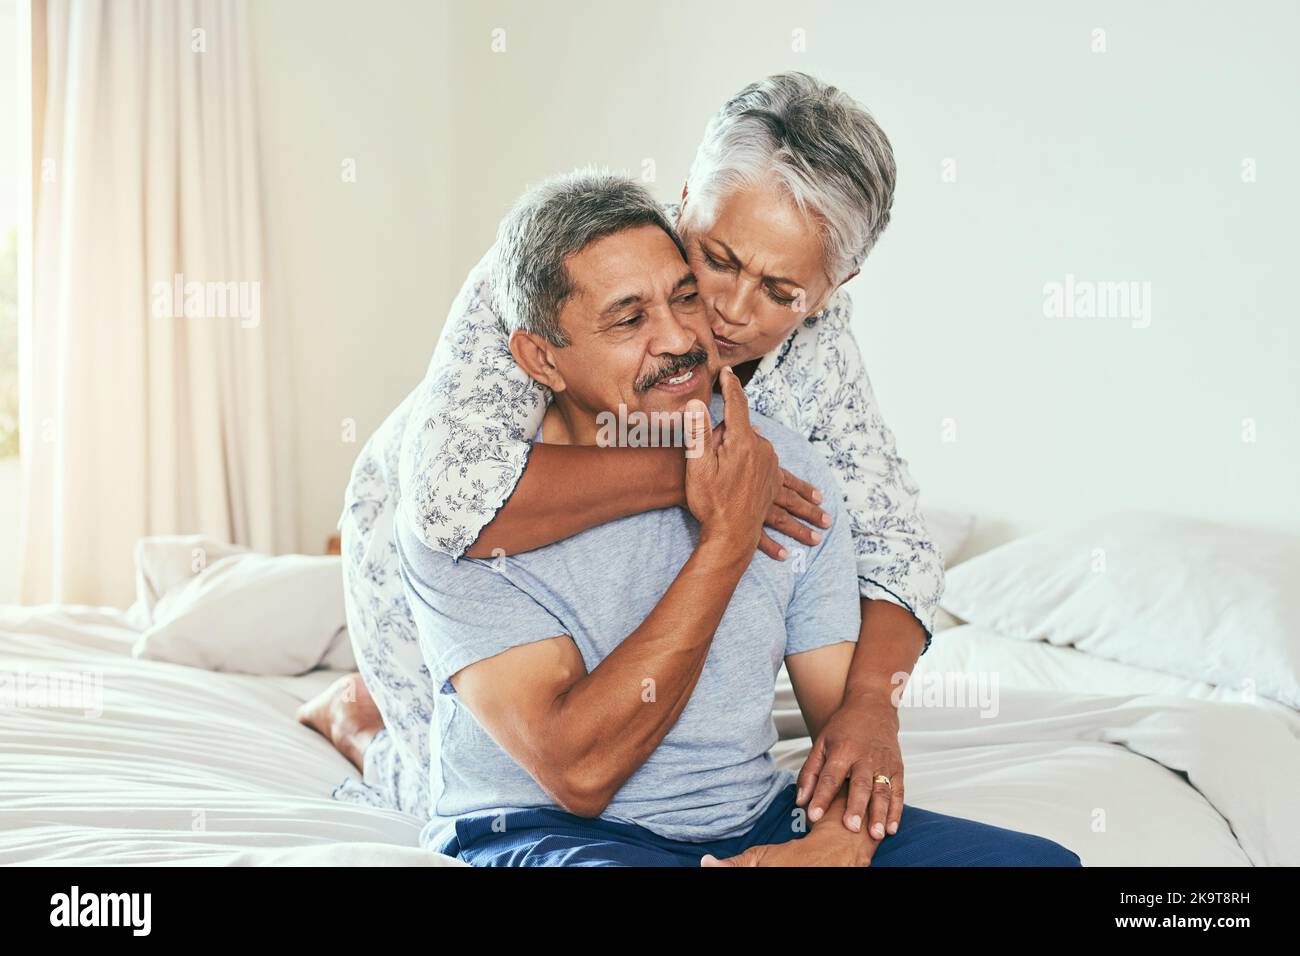 What a nice surprise. a cheerful mature man being held by his wife and receiving a kiss on the cheek while they both sit on the bed at home. Stock Photo